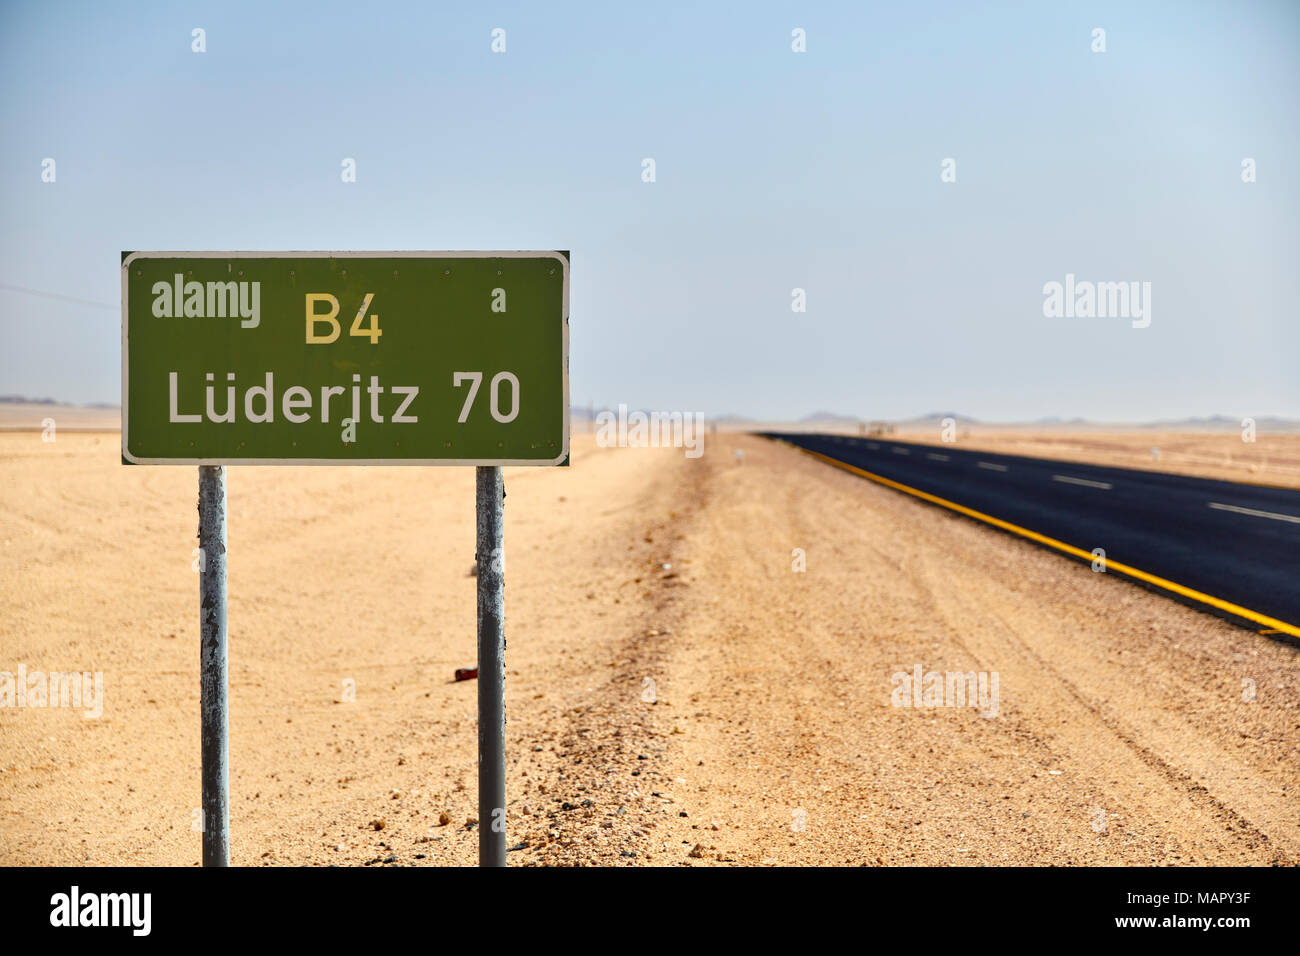 Road sign demarking route B4 and distance to Luderitz, Namibia, Africa Stock Photo